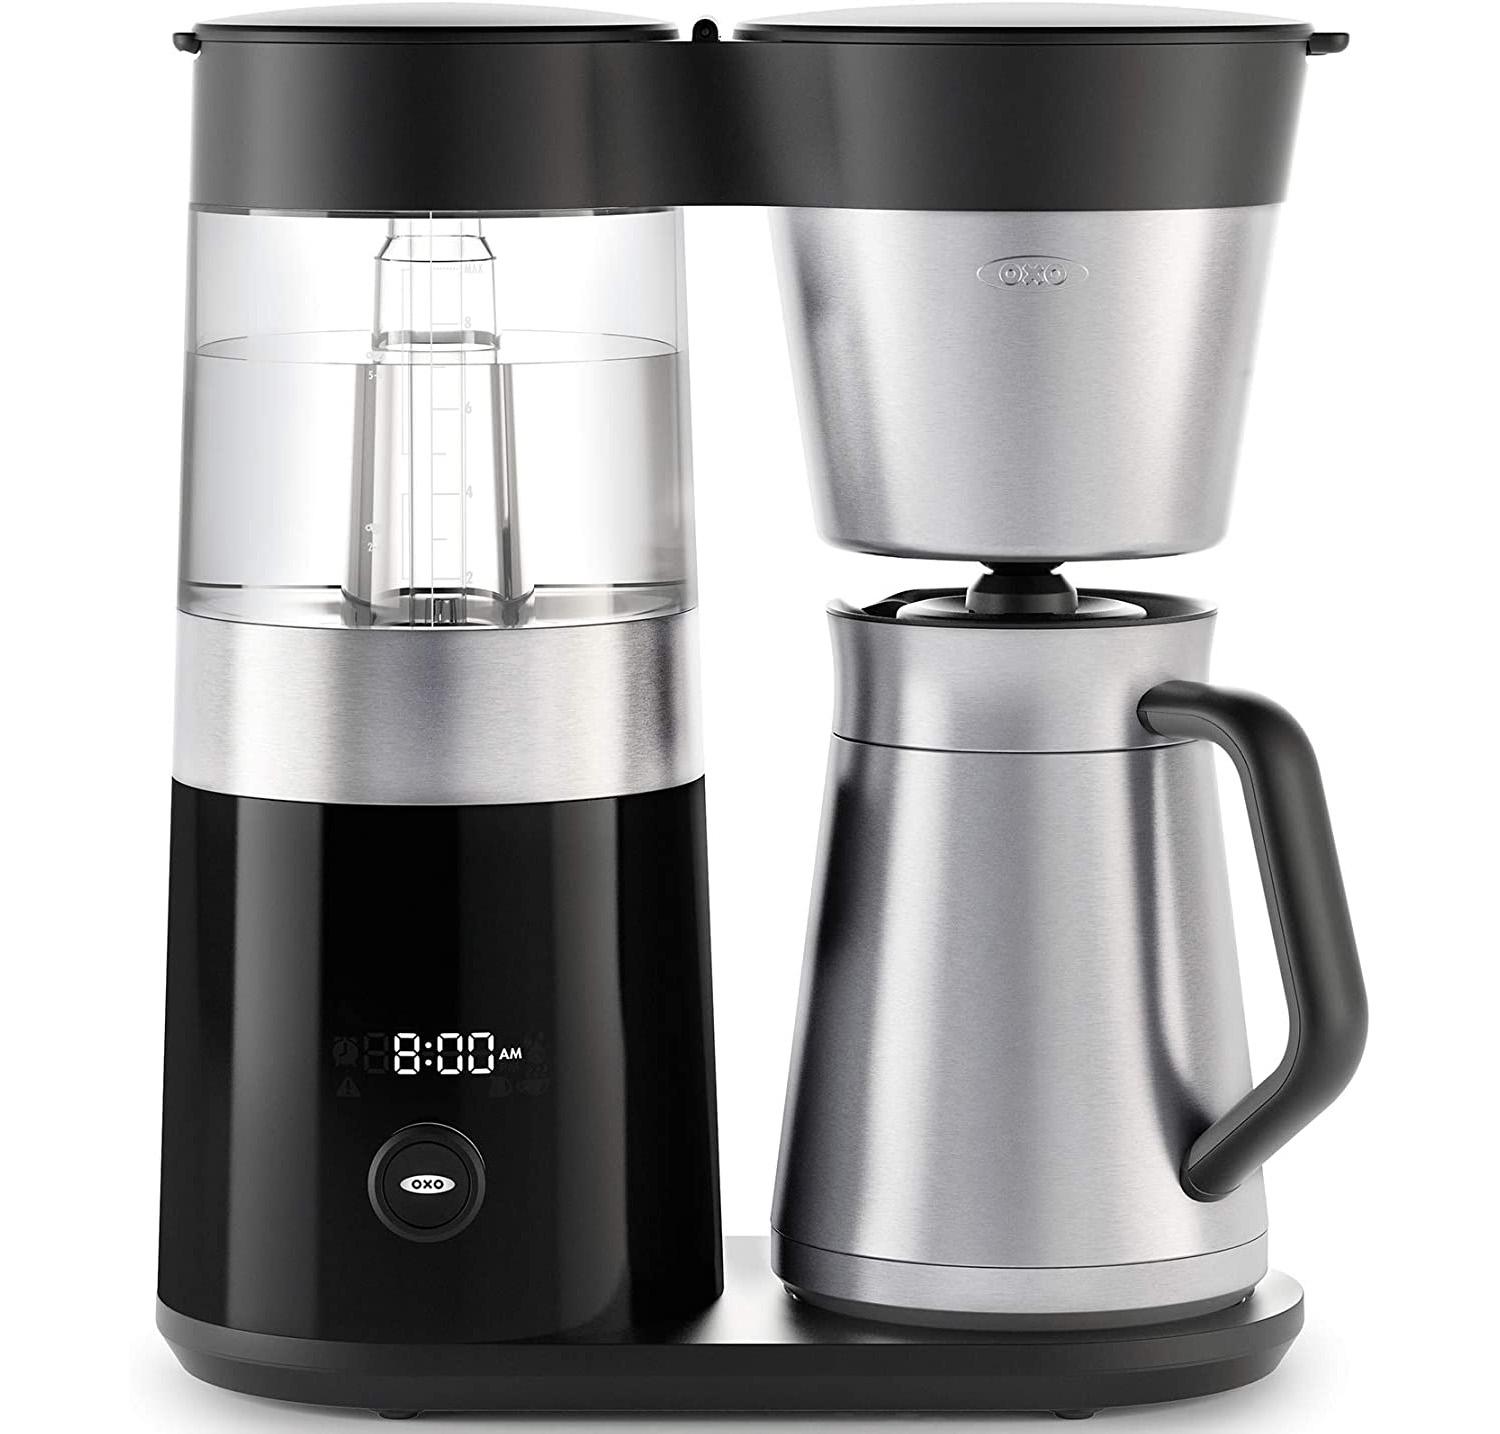 OXO 9-Cup Coffee Maker for $127.49 Shipped